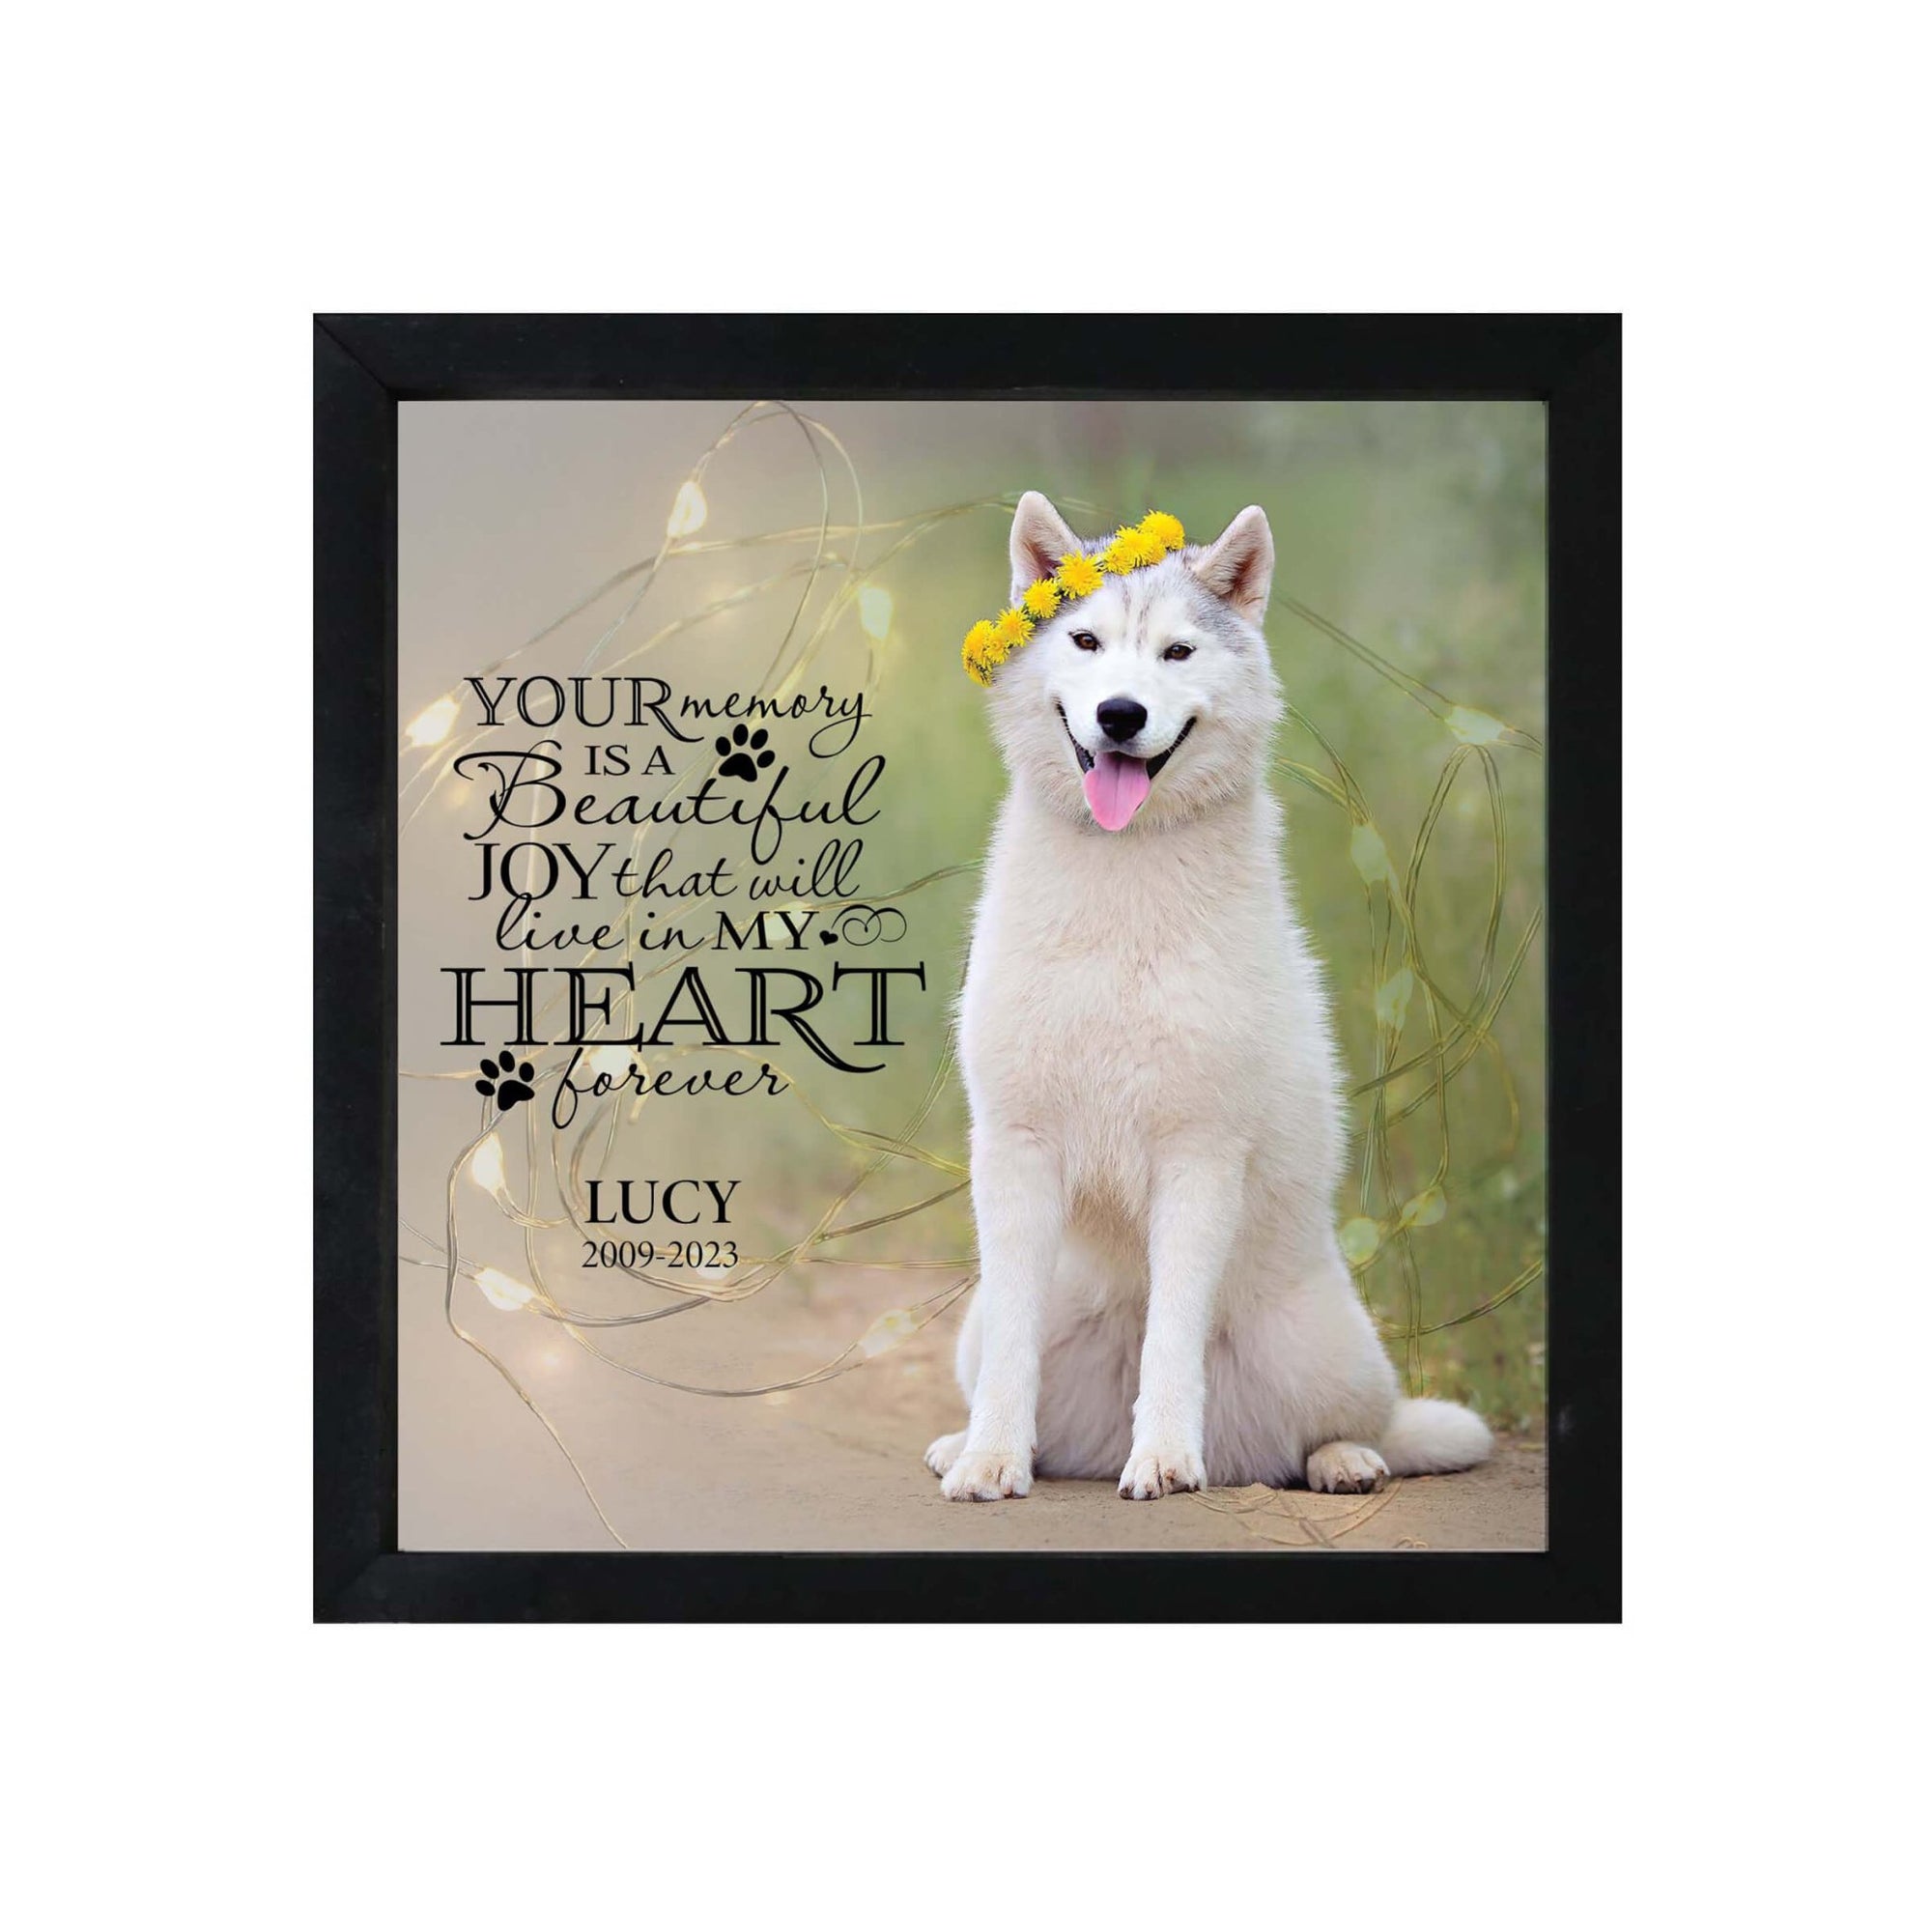 Custom Pet Memorial Framed Shadow Box Wall Décor for the Loss of Beloved Pet - Your Memory Is Beautiful - LifeSong Milestones